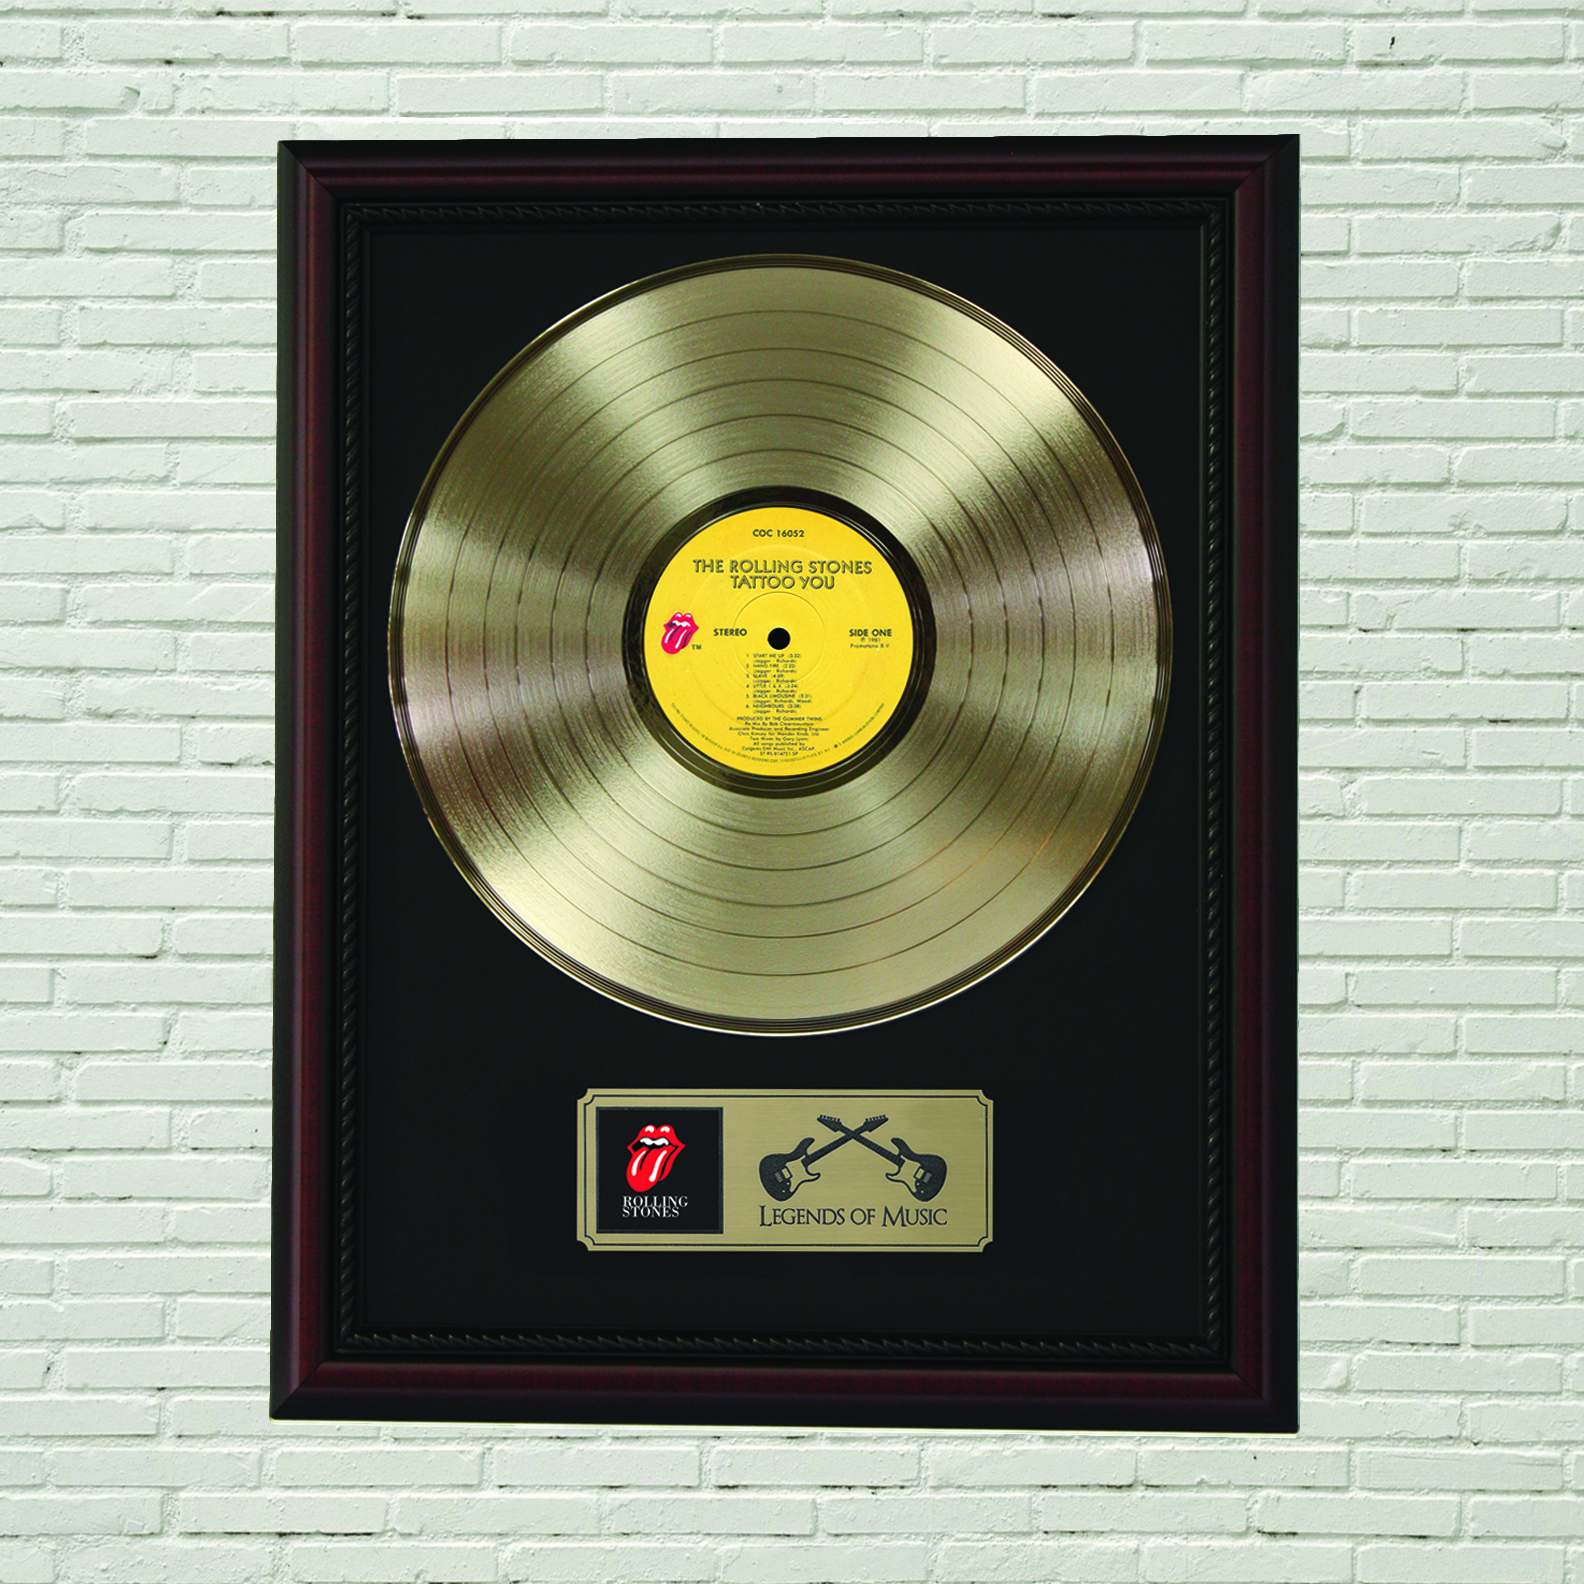 Rolling Stones - Tattoo You Framed Cherry Wood Legends Gold LP Record  Display M4 - Gold Record Outlet Album and Disc Collectible Memorabilia